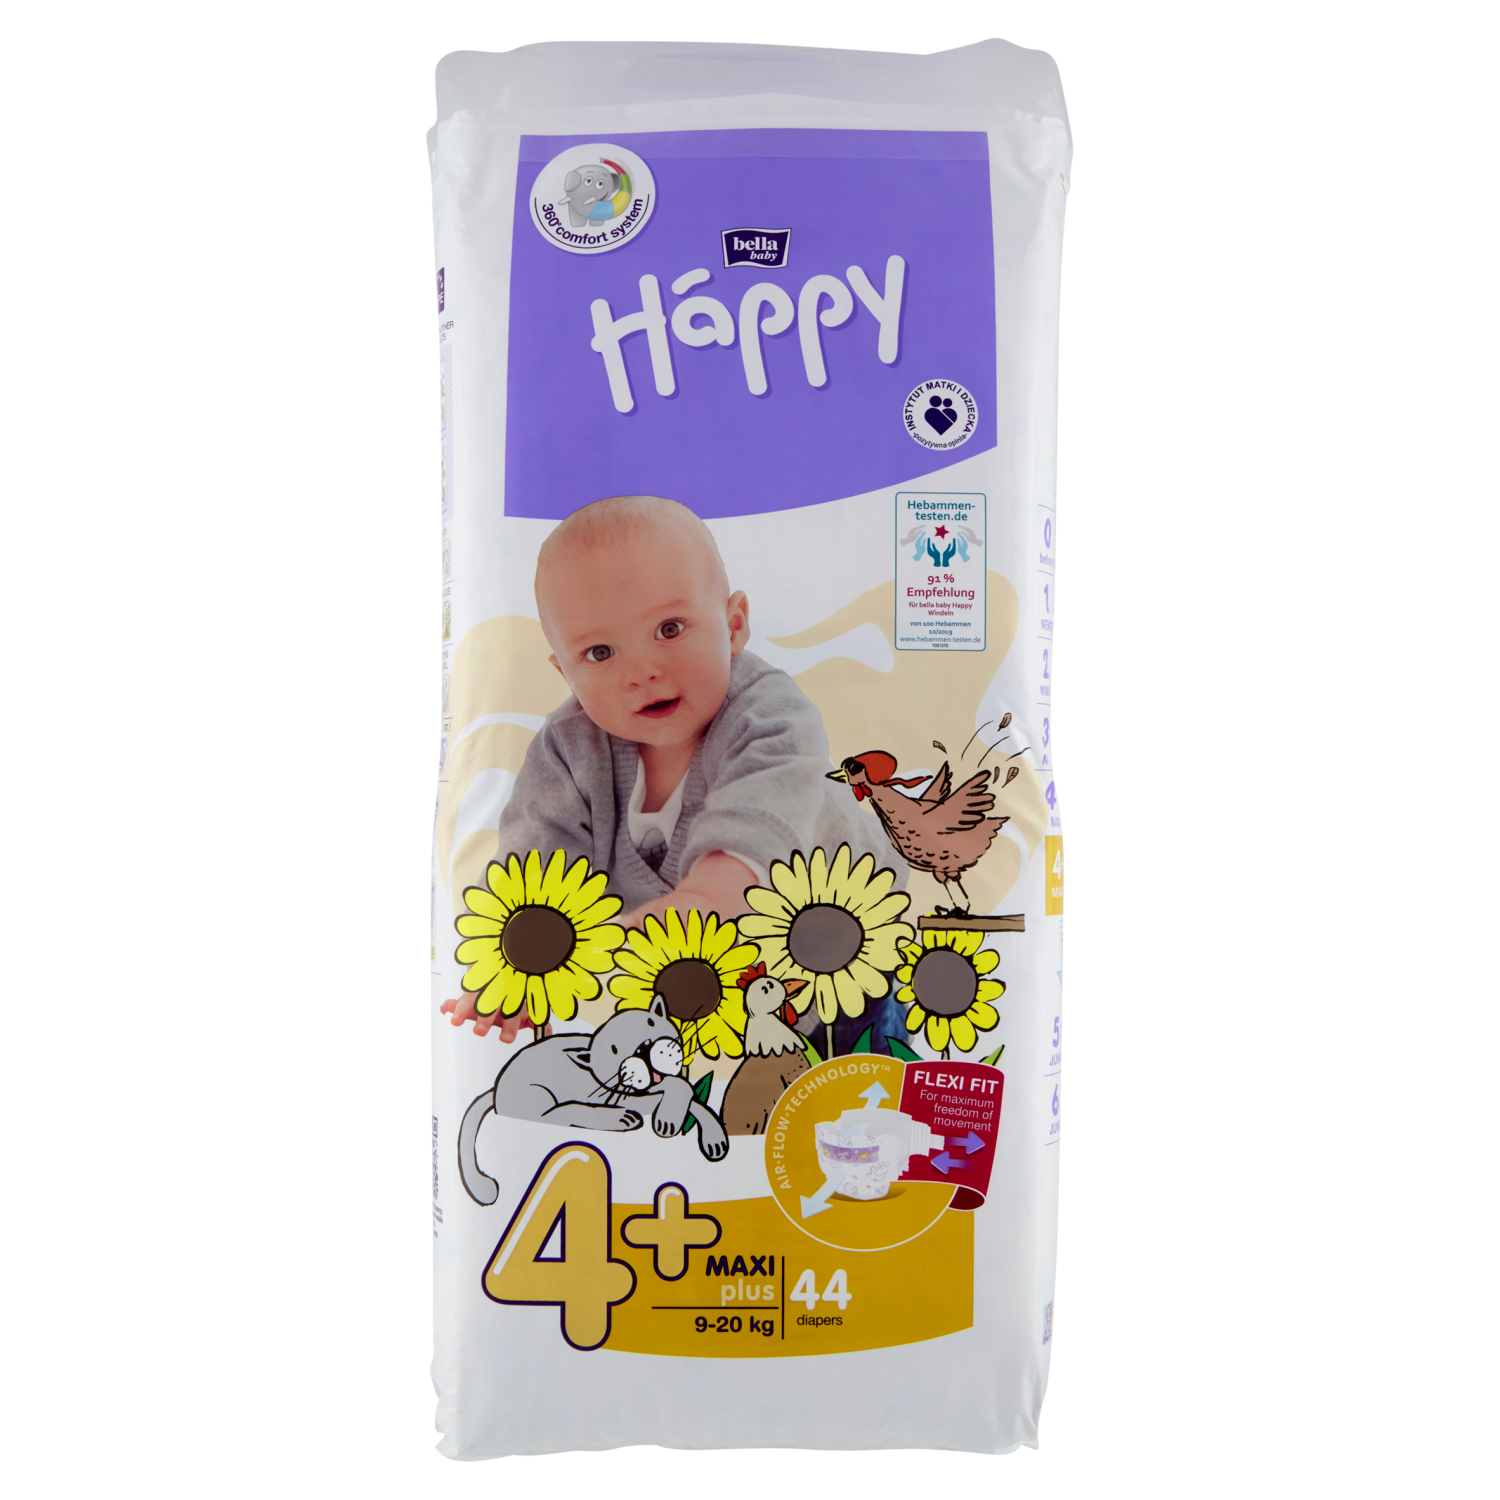 pampers baby dry misure